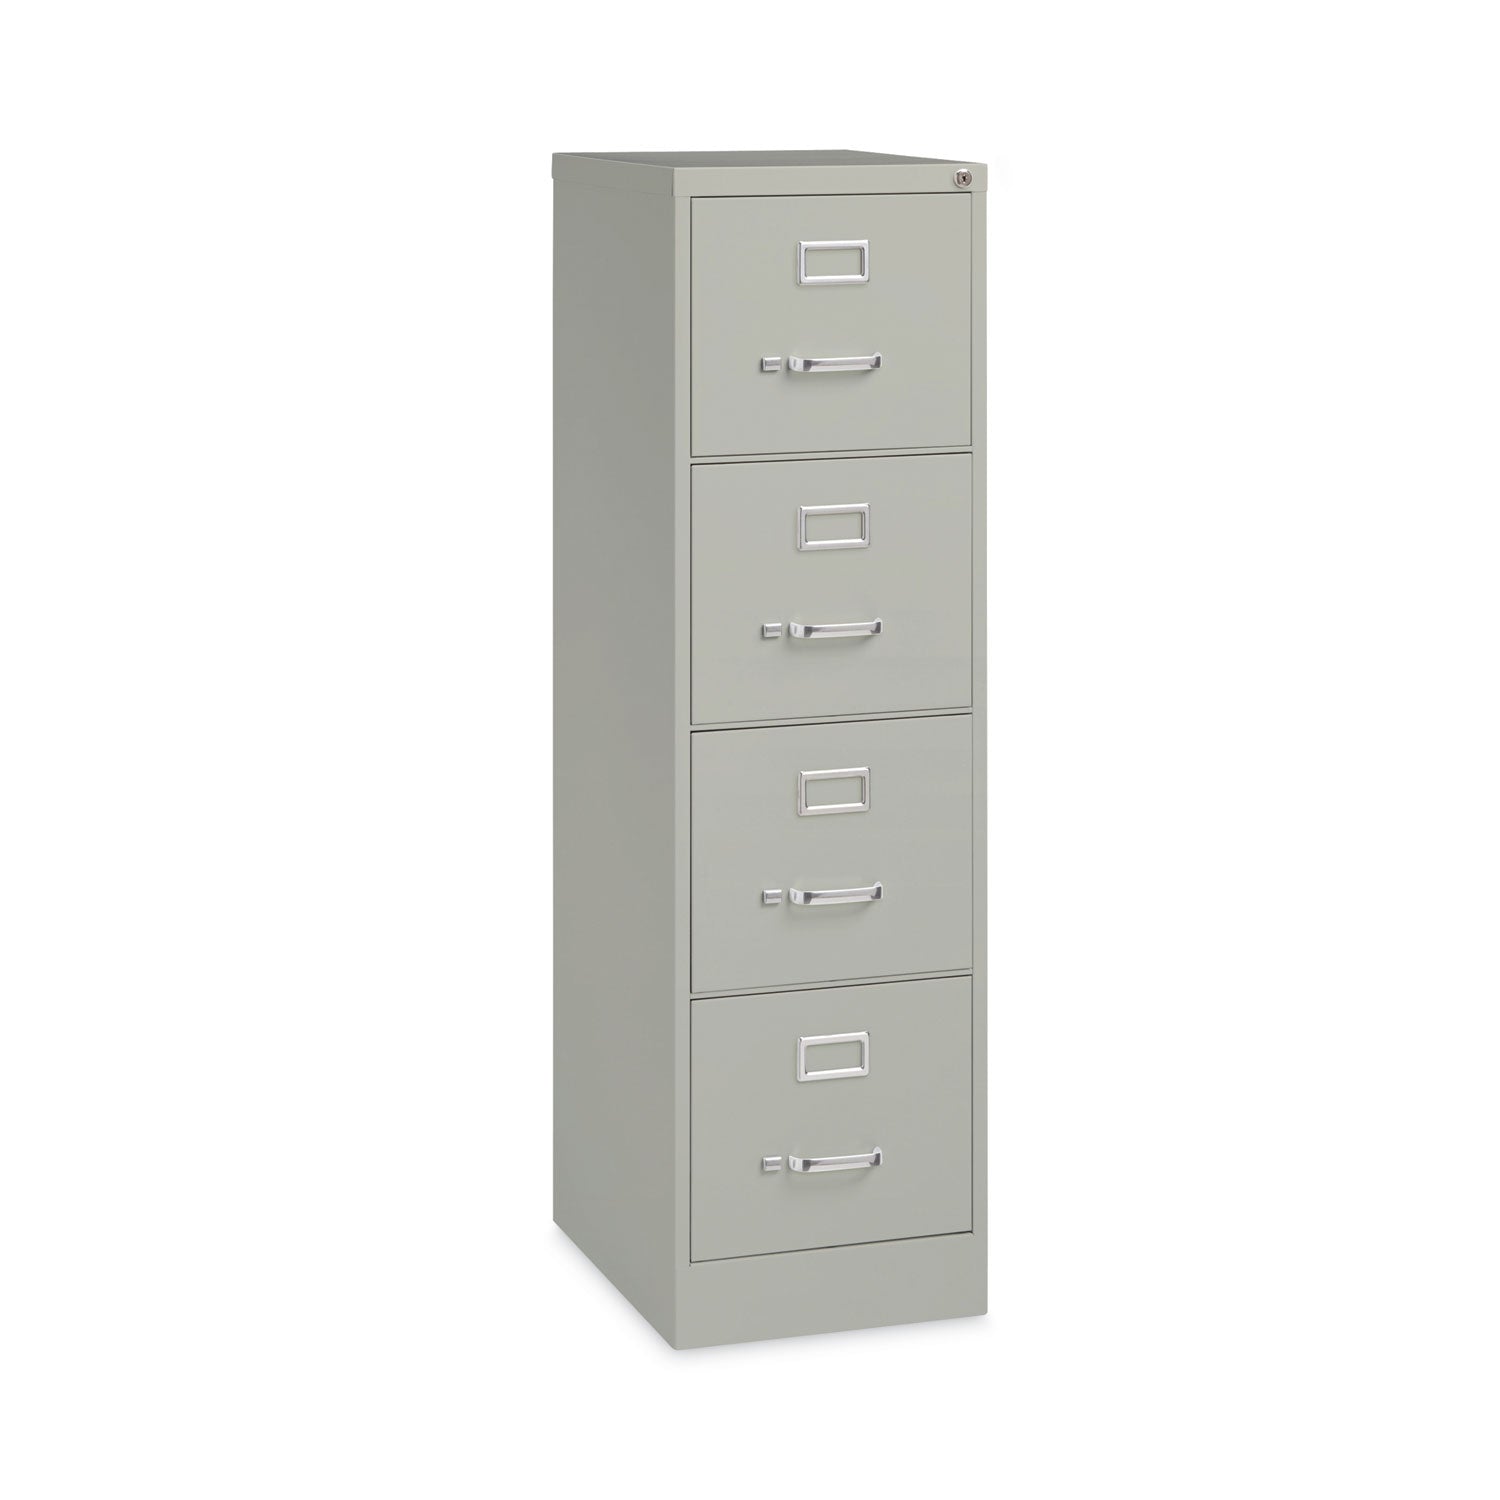 vertical-letter-file-cabinet-4-letter-size-file-drawers-light-gray-15-x-22-x-52_hid22733 - 1